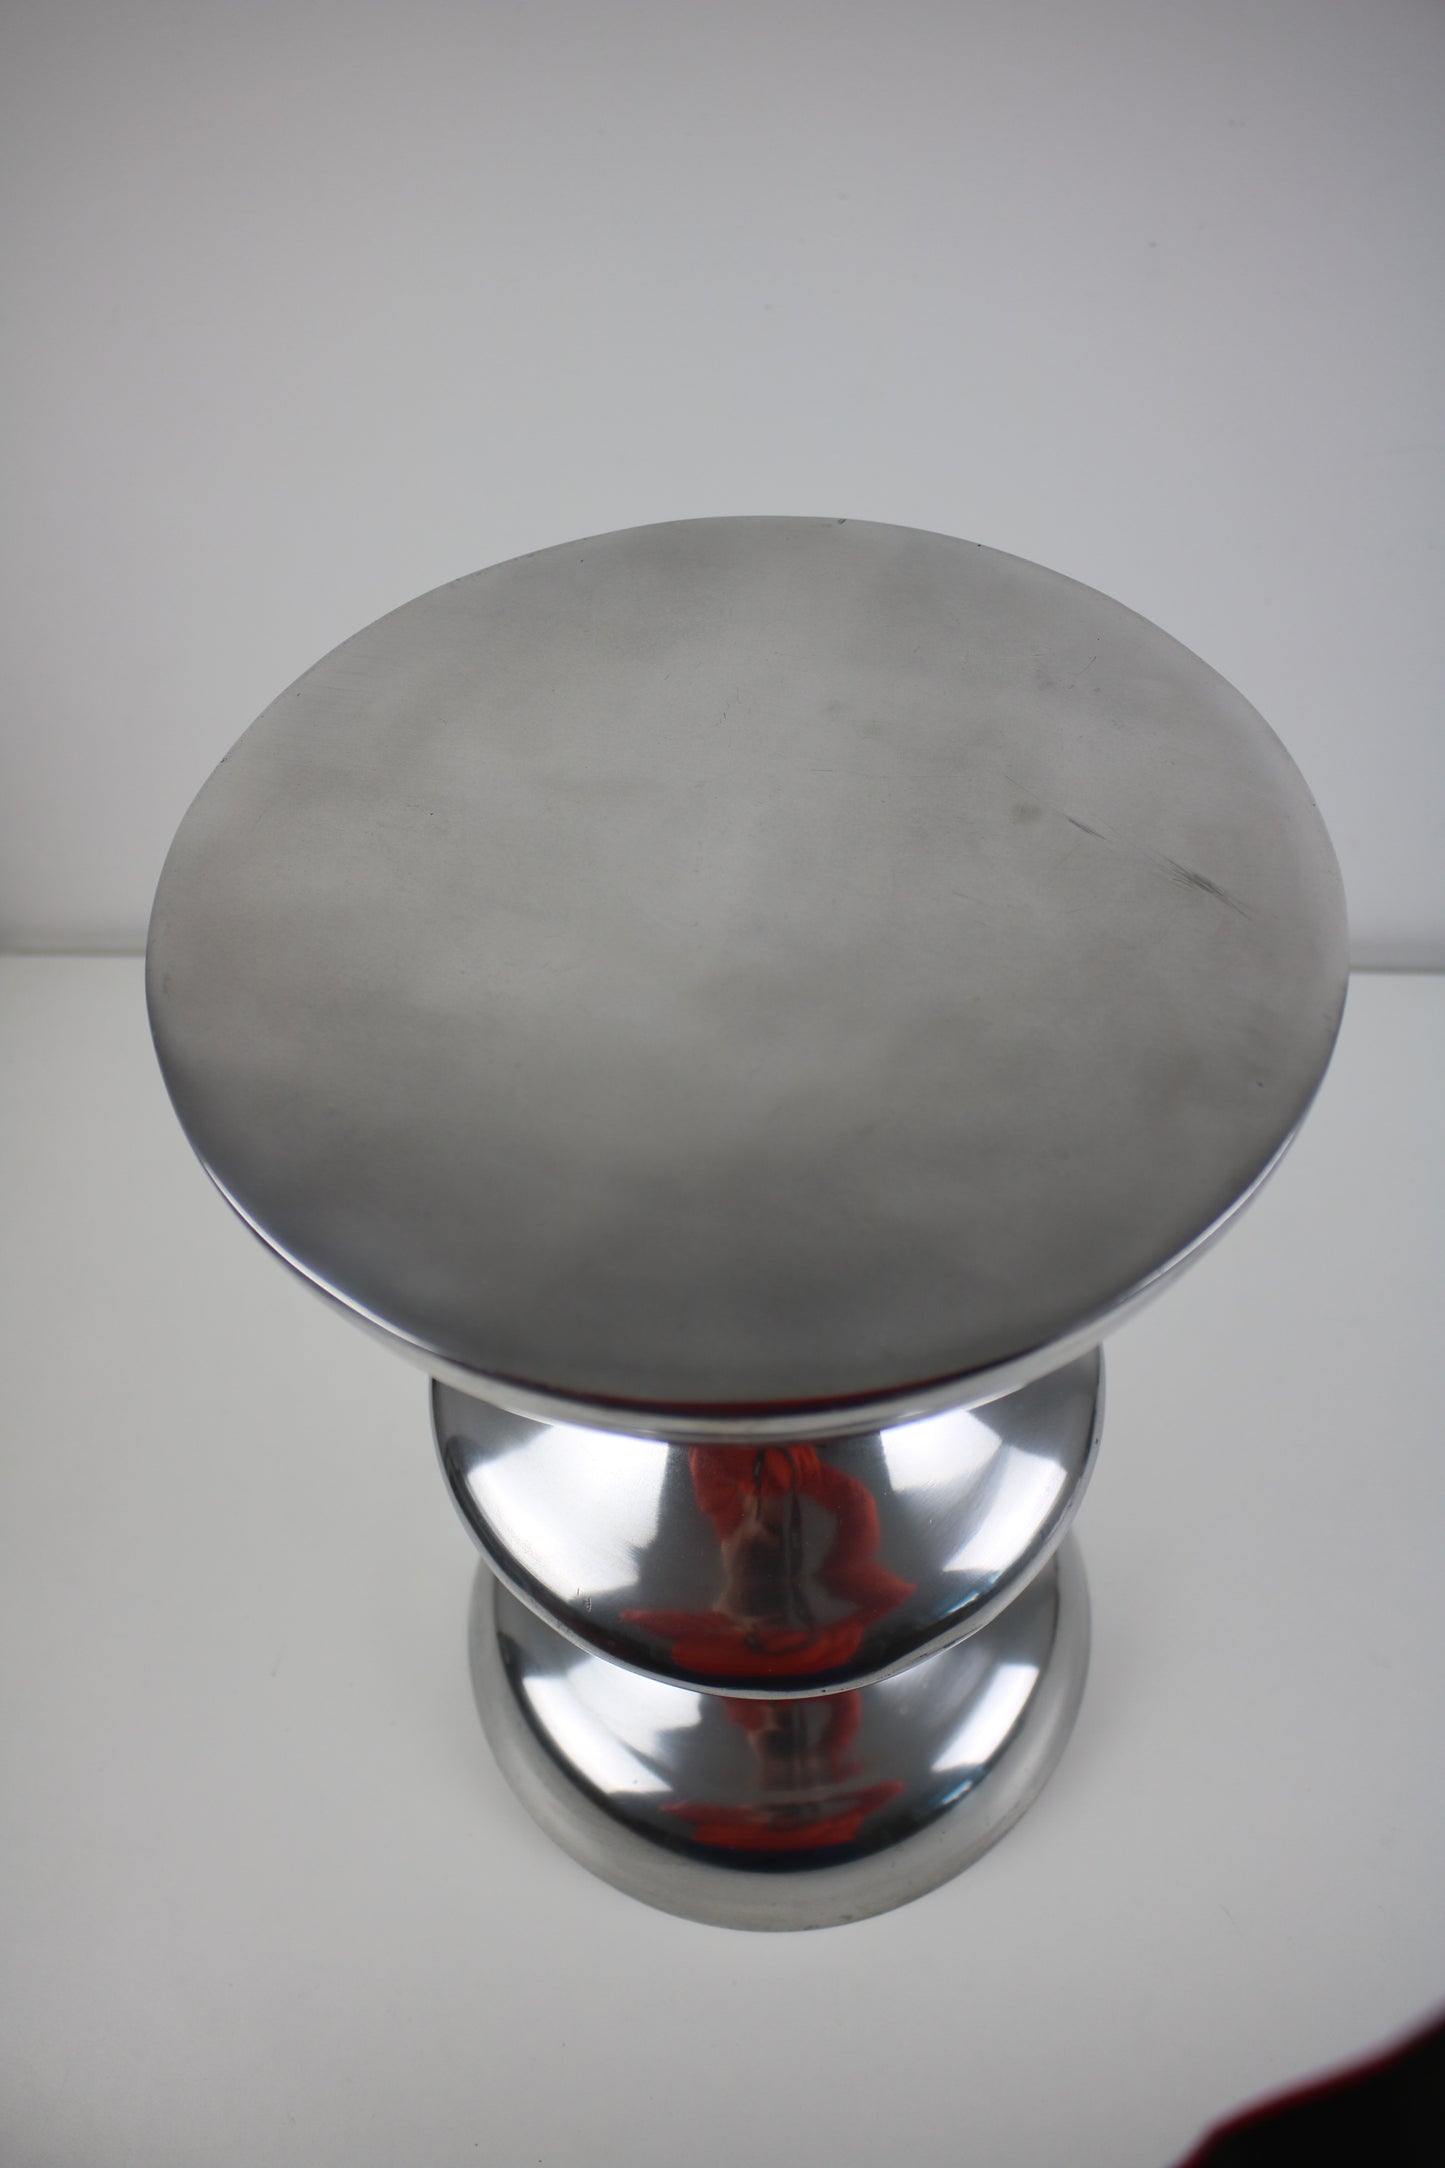 Preloved cast and polished aluminium side table /stool